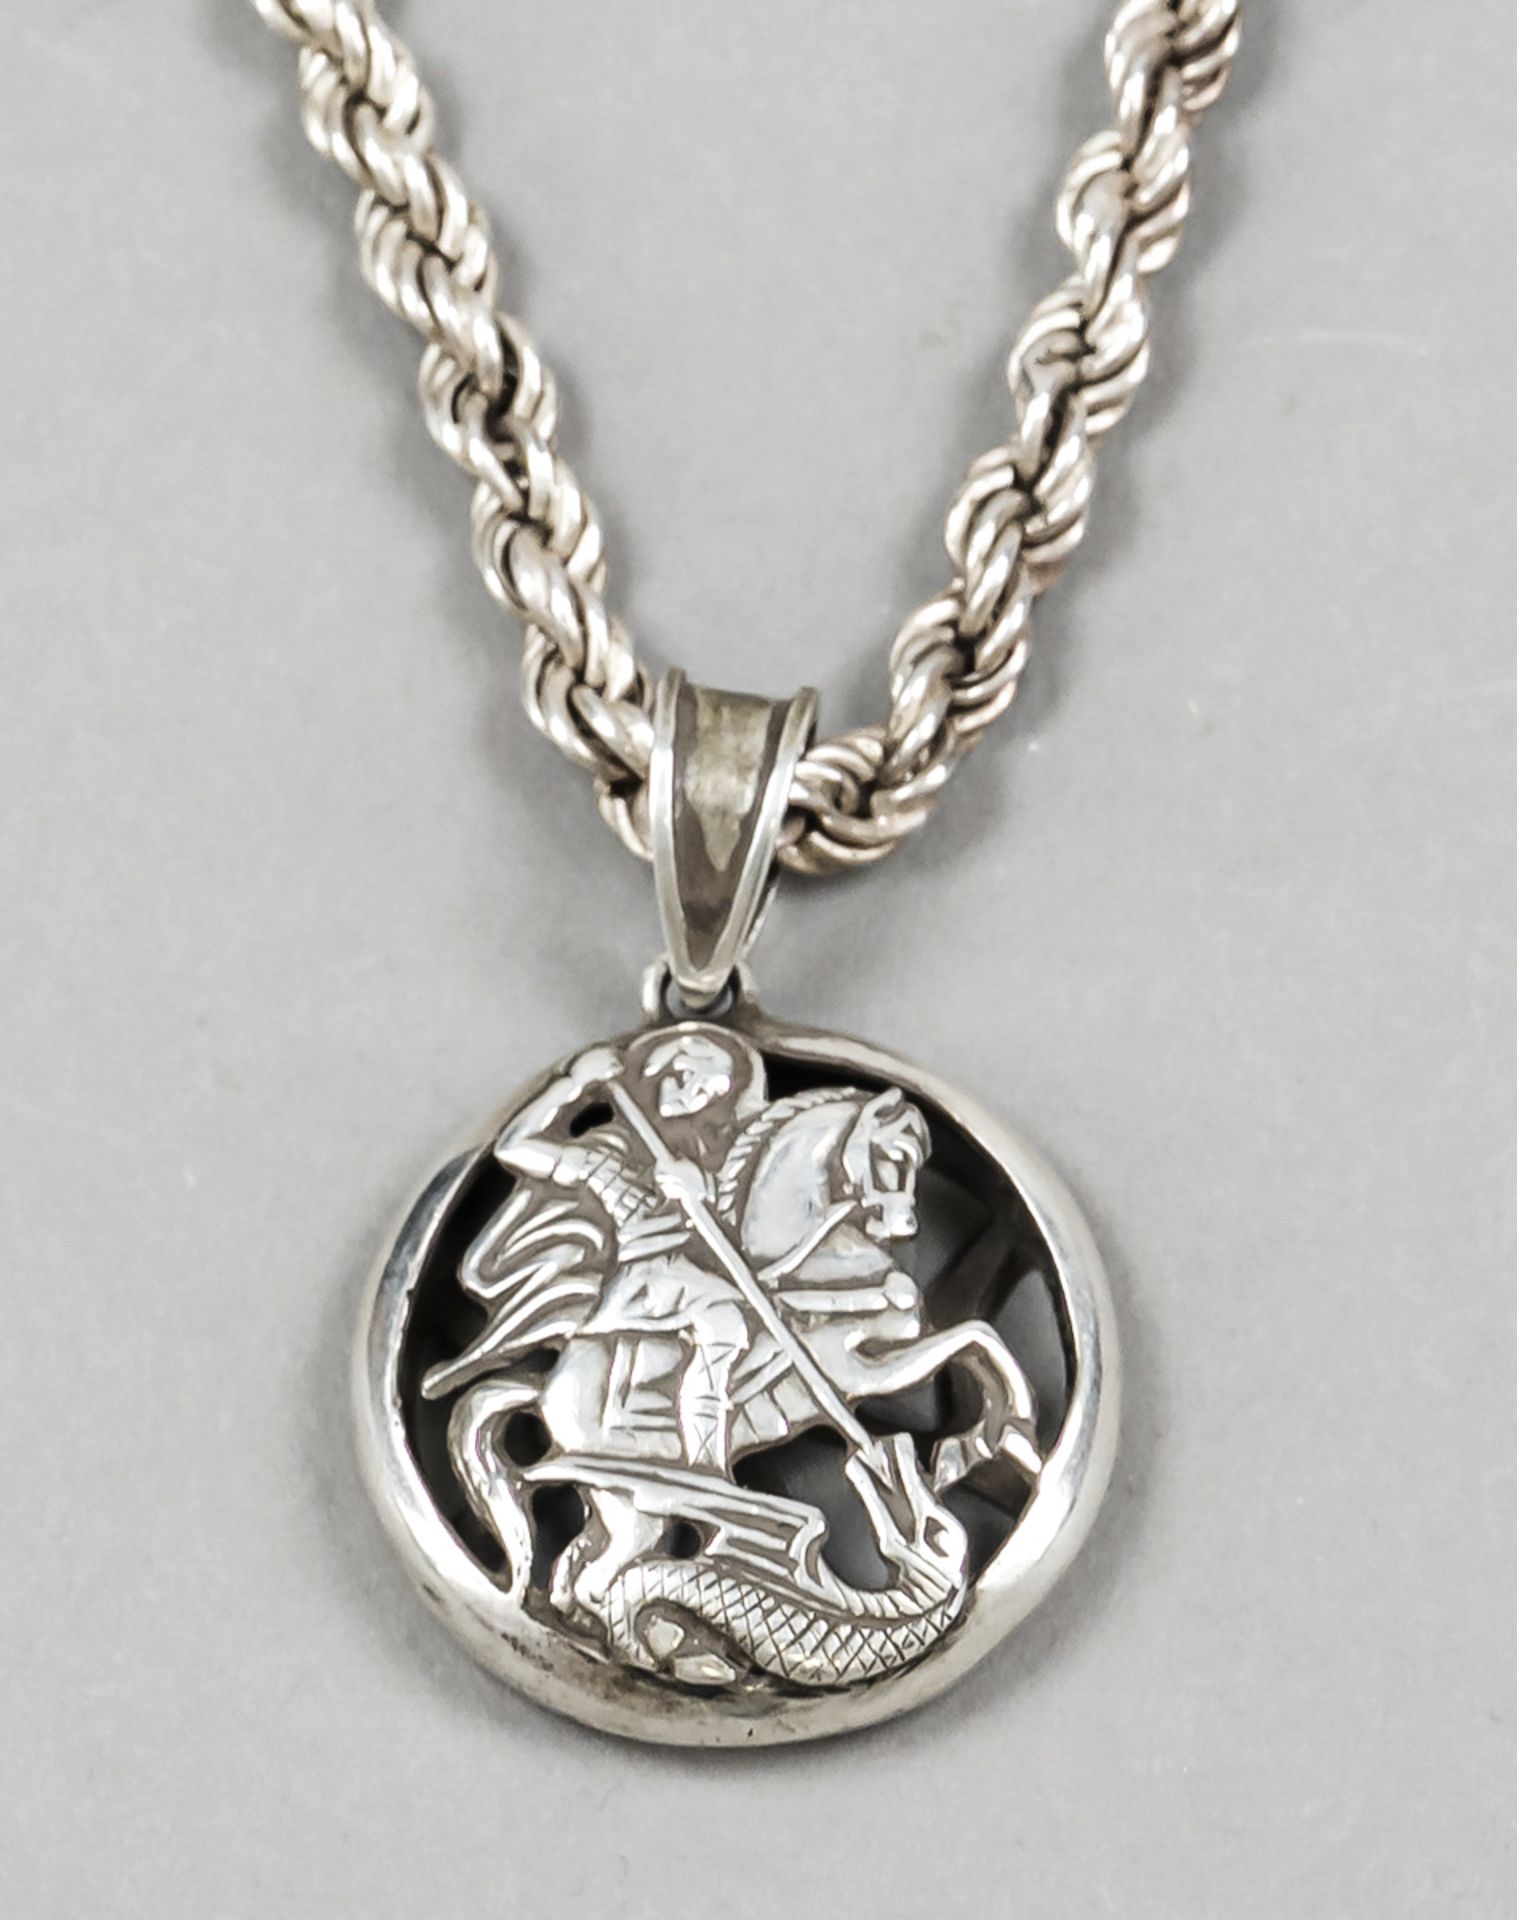 Round pendant, 20th century, silver 875/000, hallmark Jerusalem cross, open-worked, front with St.